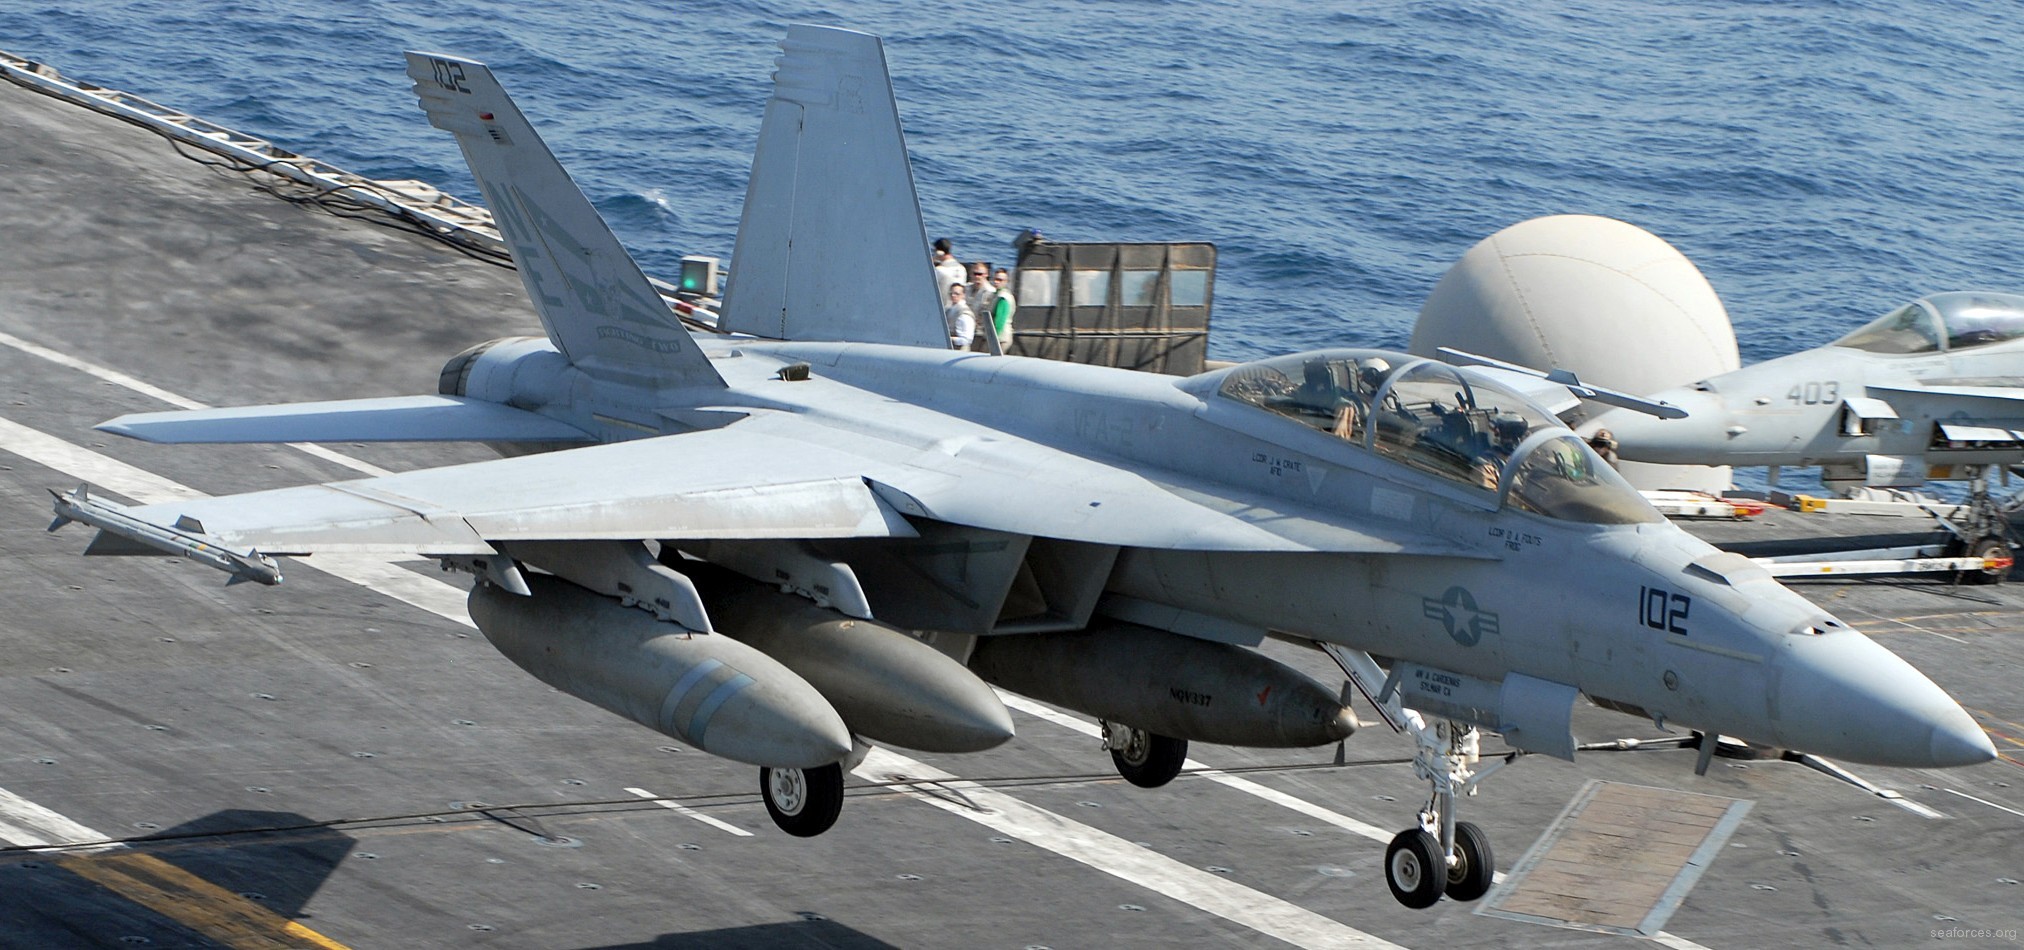 vfa-2 bounty hunters strike fighter squadron us navy f/a-18f super hornet carrier air wing cvw-2 uss abraham lincoln cvn-72 77